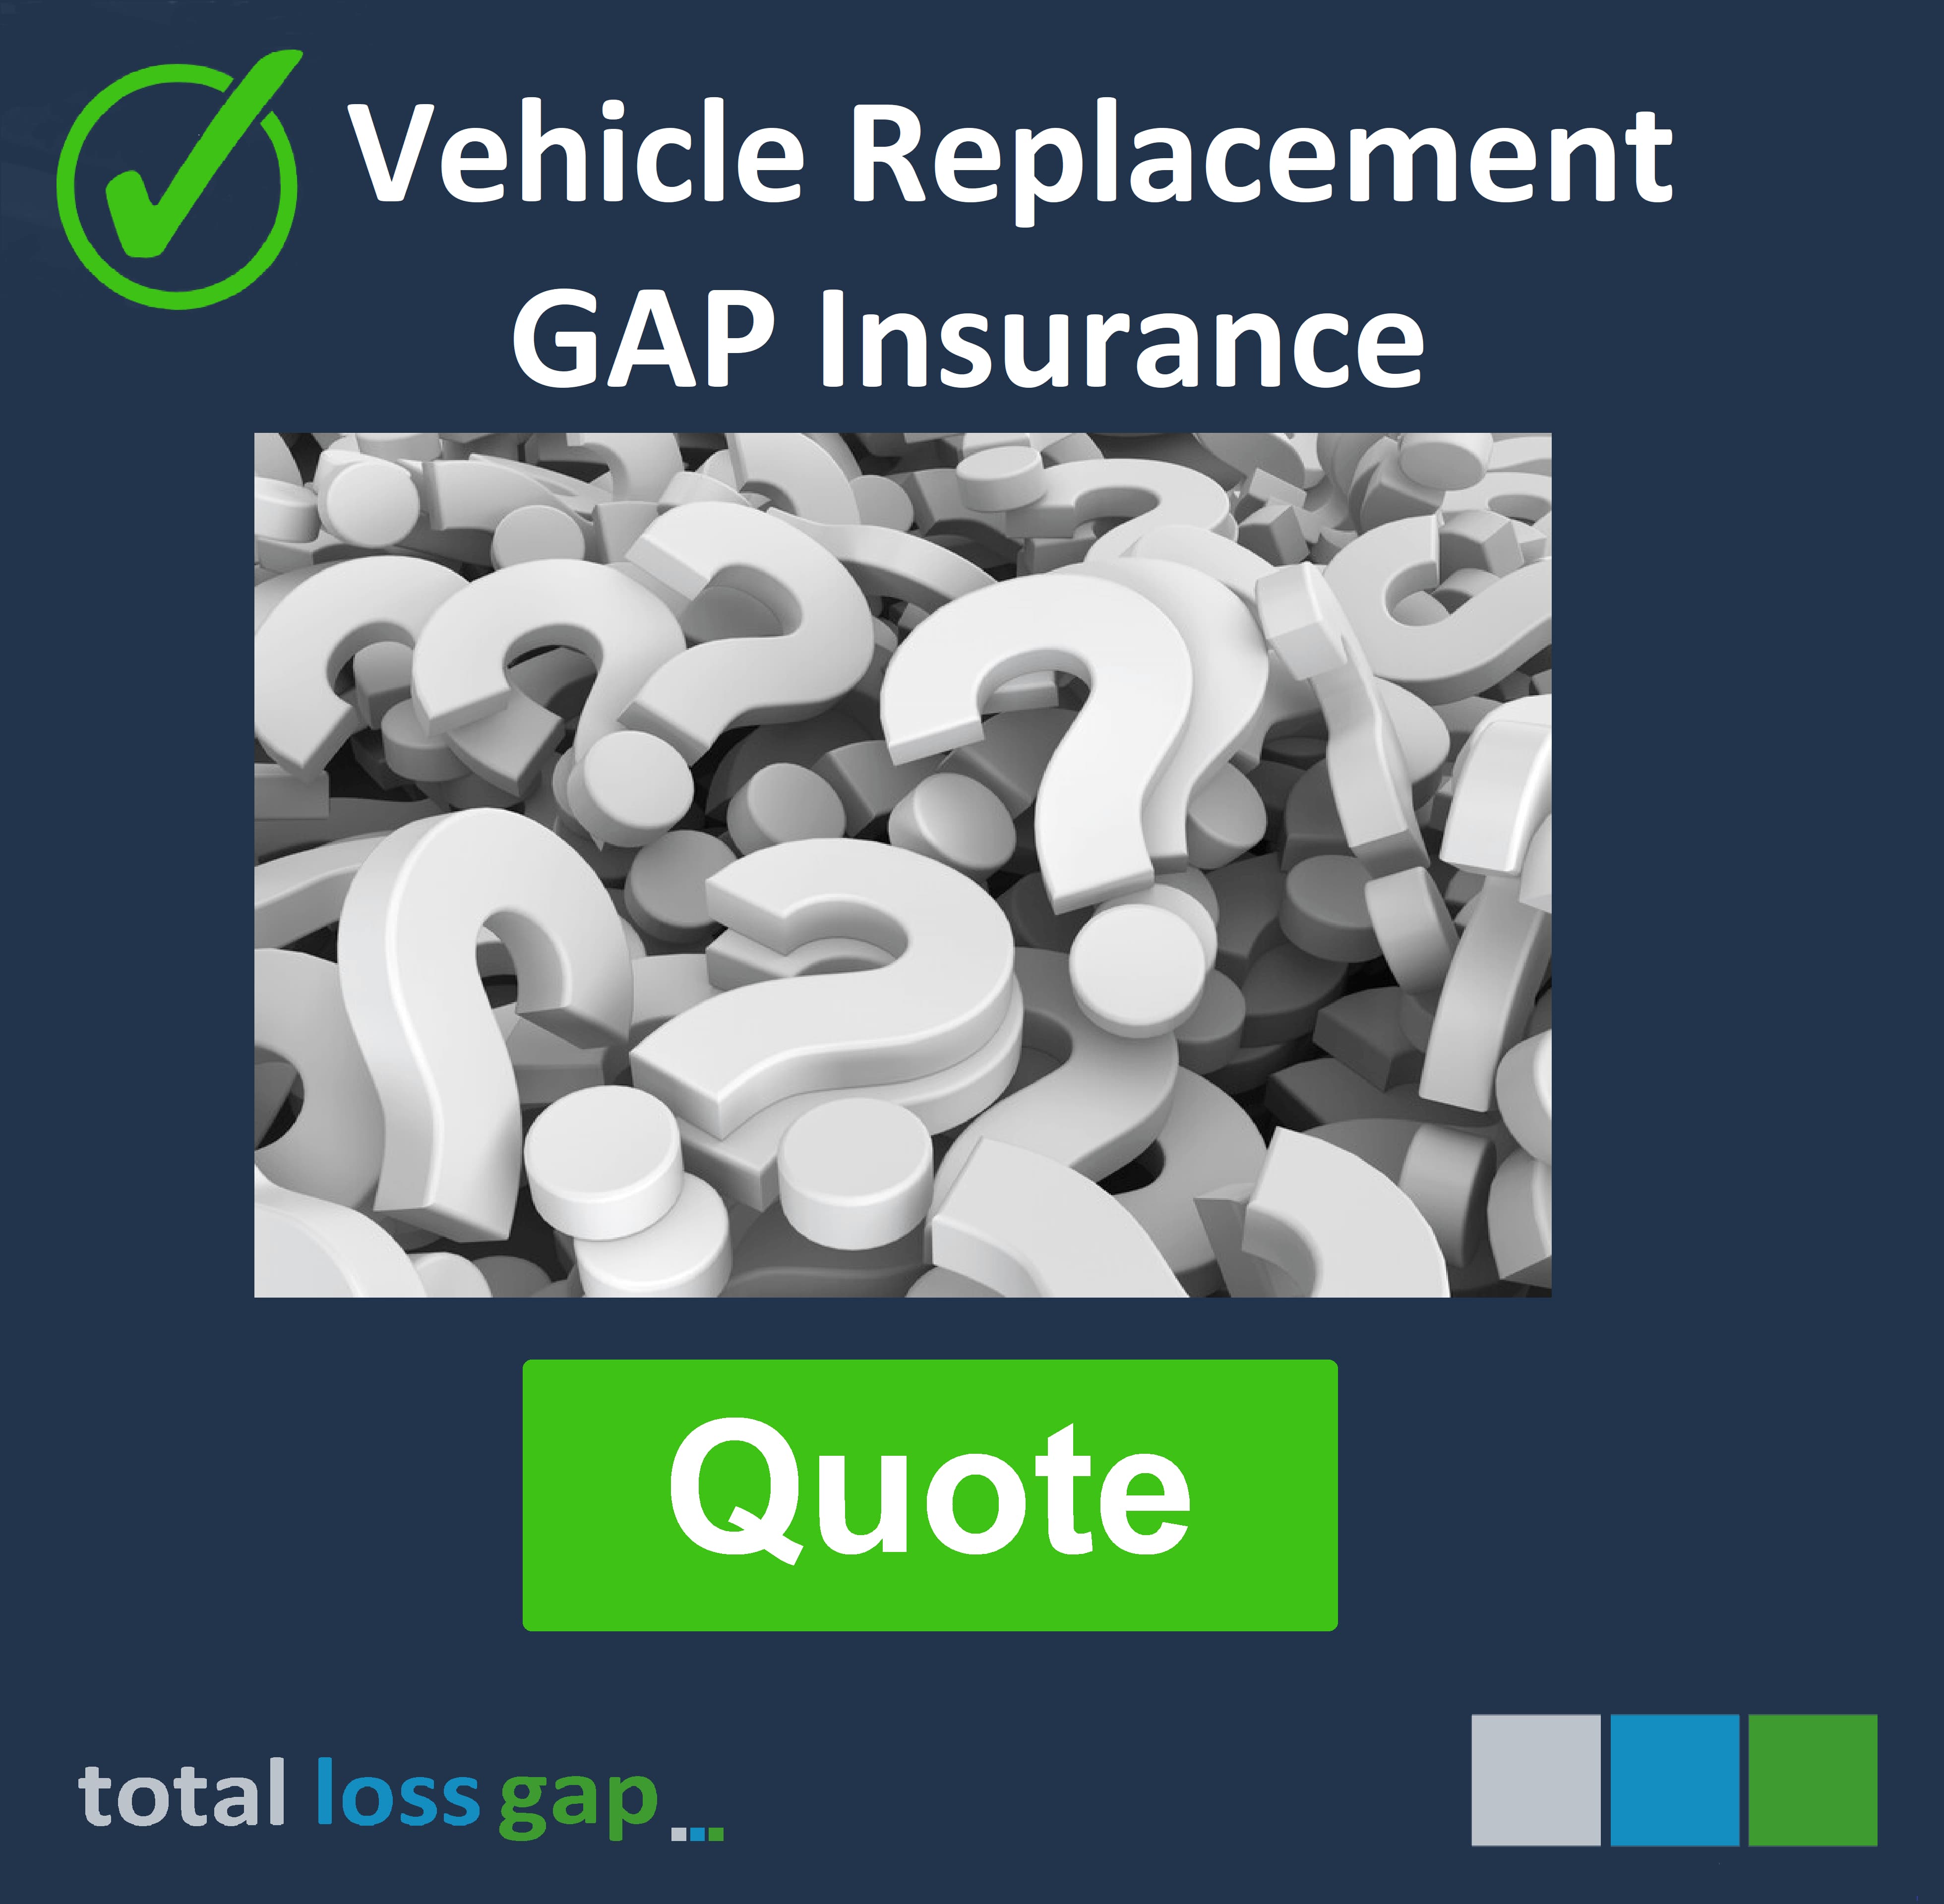 Vehicle Replacement Insurance for your Audi